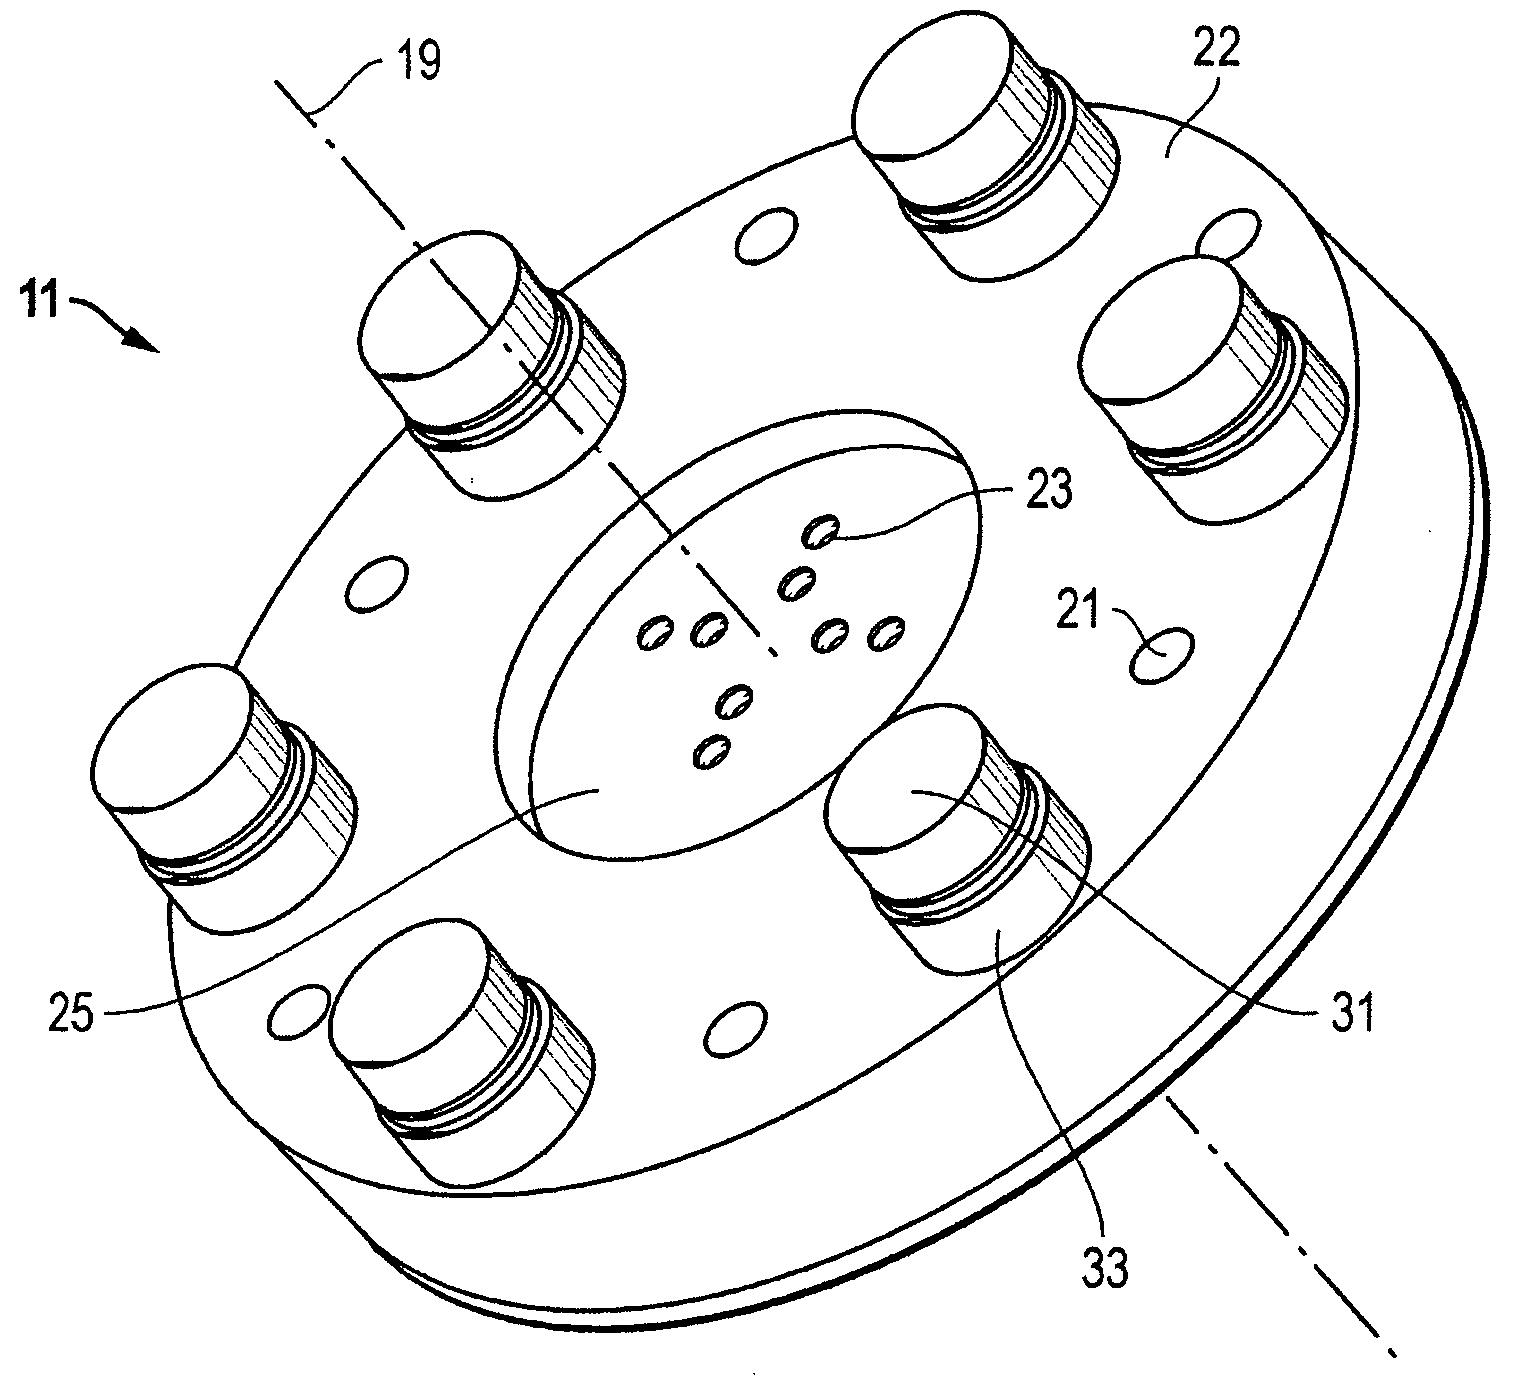 System, method, and apparatus for non-traditional kinematics/tooling for efficient charging of lapping plates